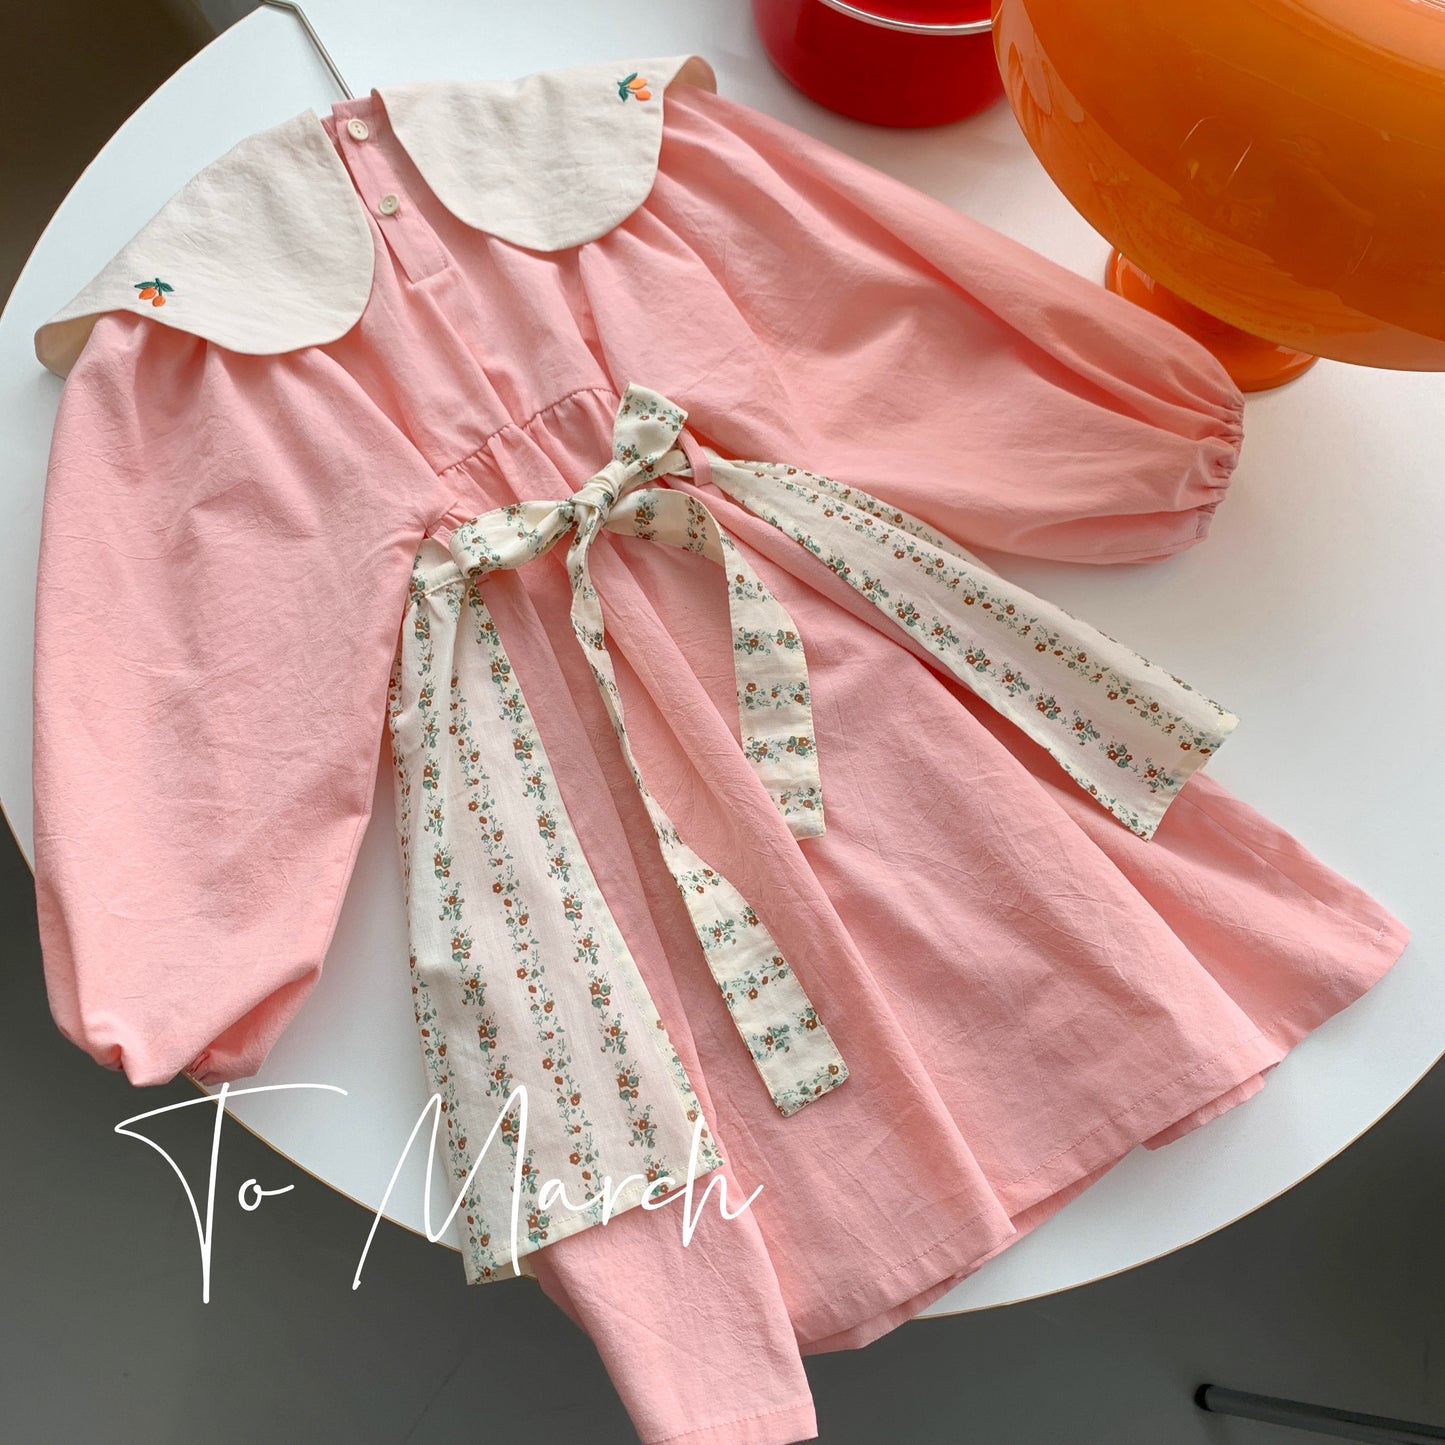 Vintage Style Embroidered Apron Girls' Dress